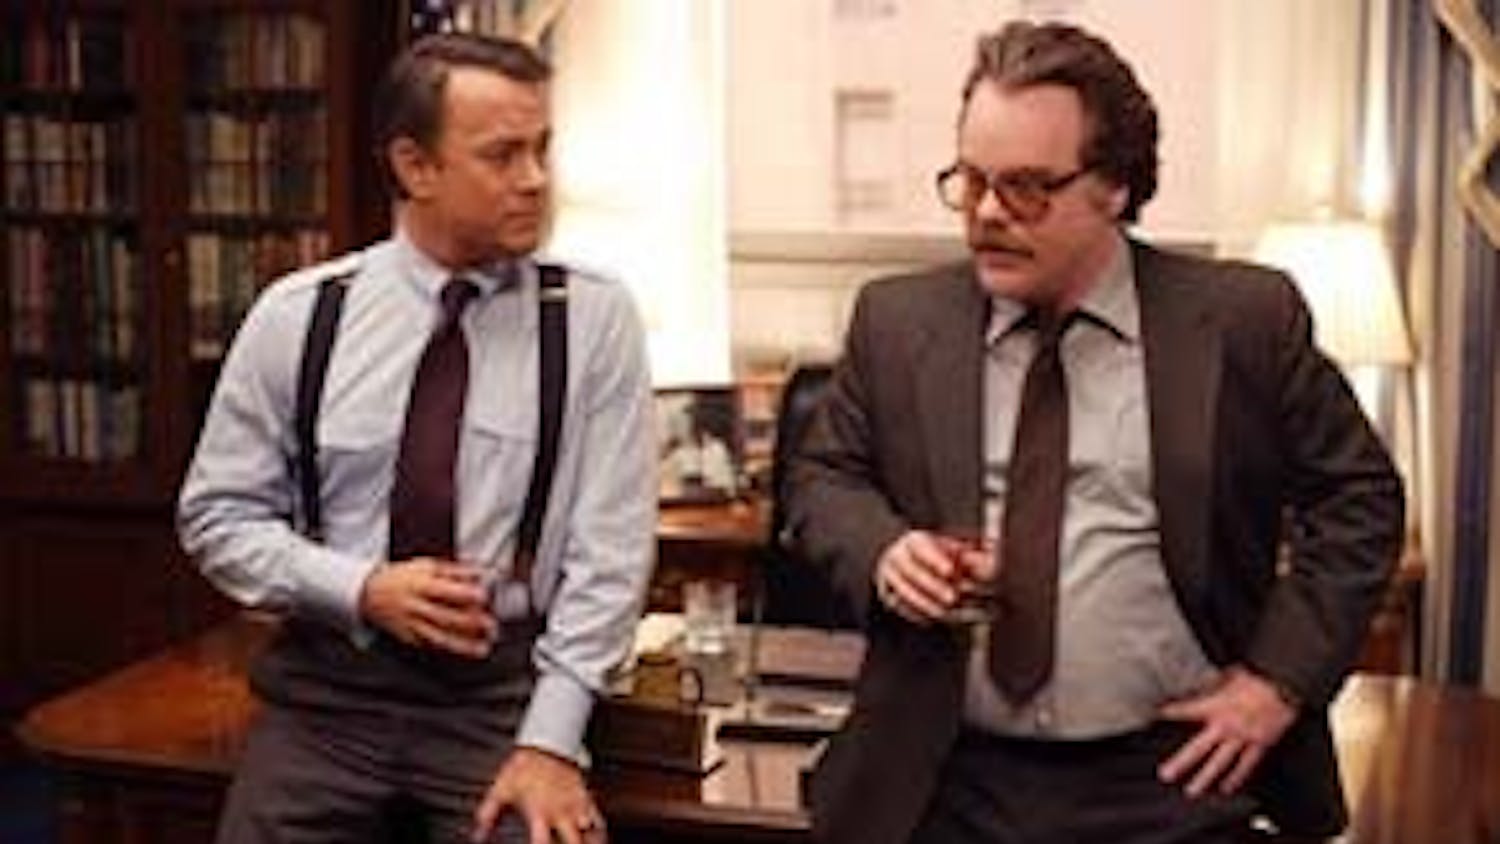 Congressman Charlie Wilson (TOM HANKS) receives a briefing from CIA agent Gust Avrakotos (PHILIP SEYMOUR HOFFMAN) in the film that tells the raucous true story of the largest covert operation in history: ?Charlie Wilson?s War?.